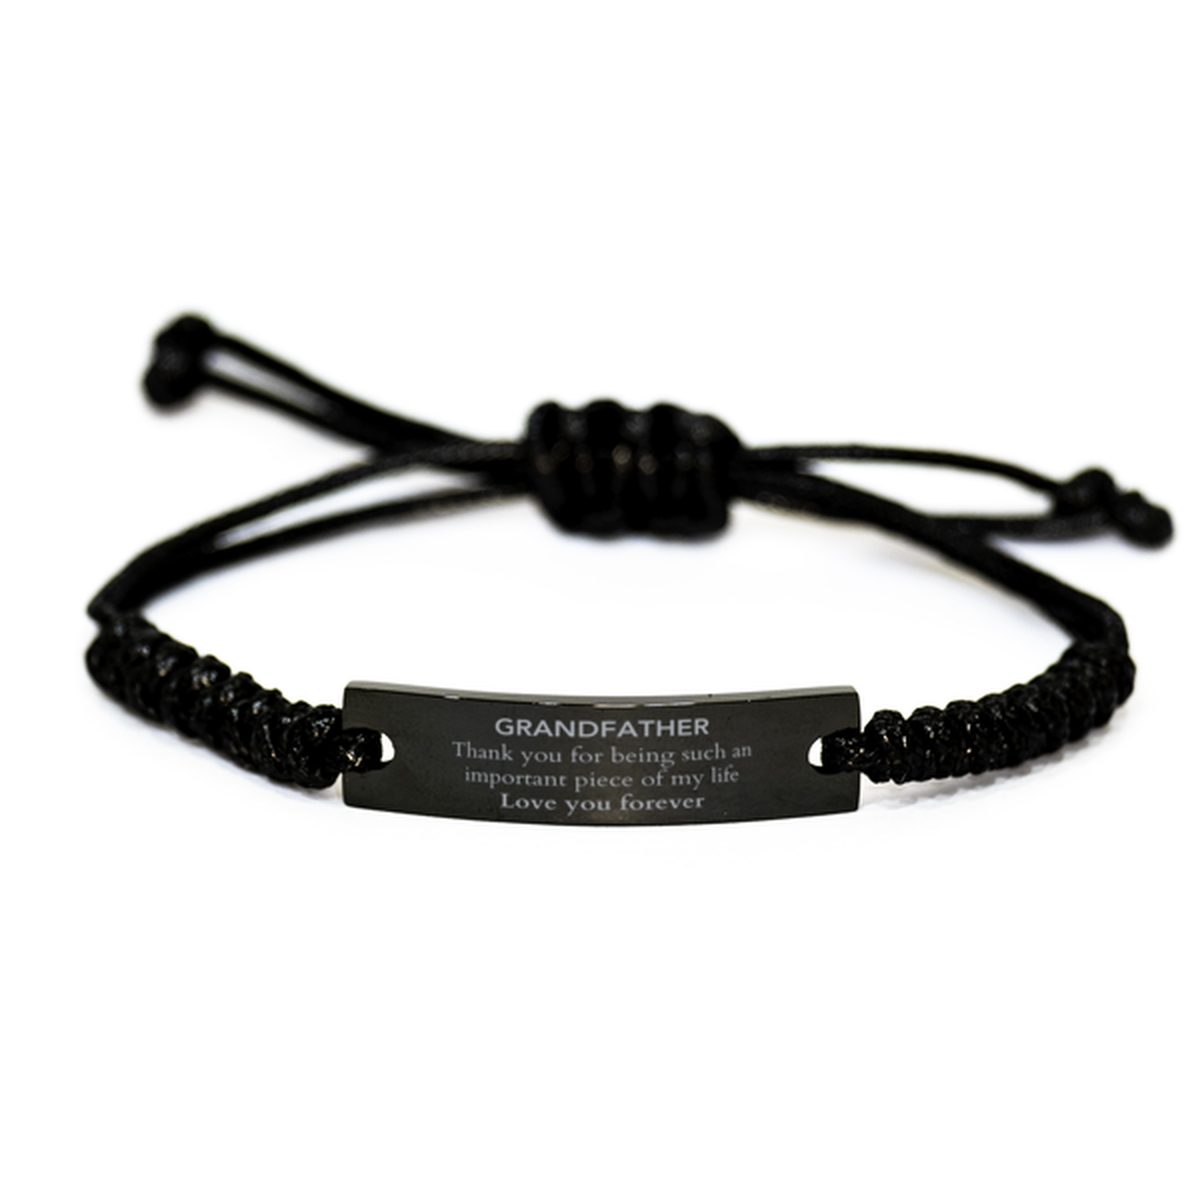 Appropriate Grandfather Black Rope Bracelet Epic Birthday Gifts for Grandfather Thank you for being such an important piece of my life Grandfather Christmas Mothers Fathers Day